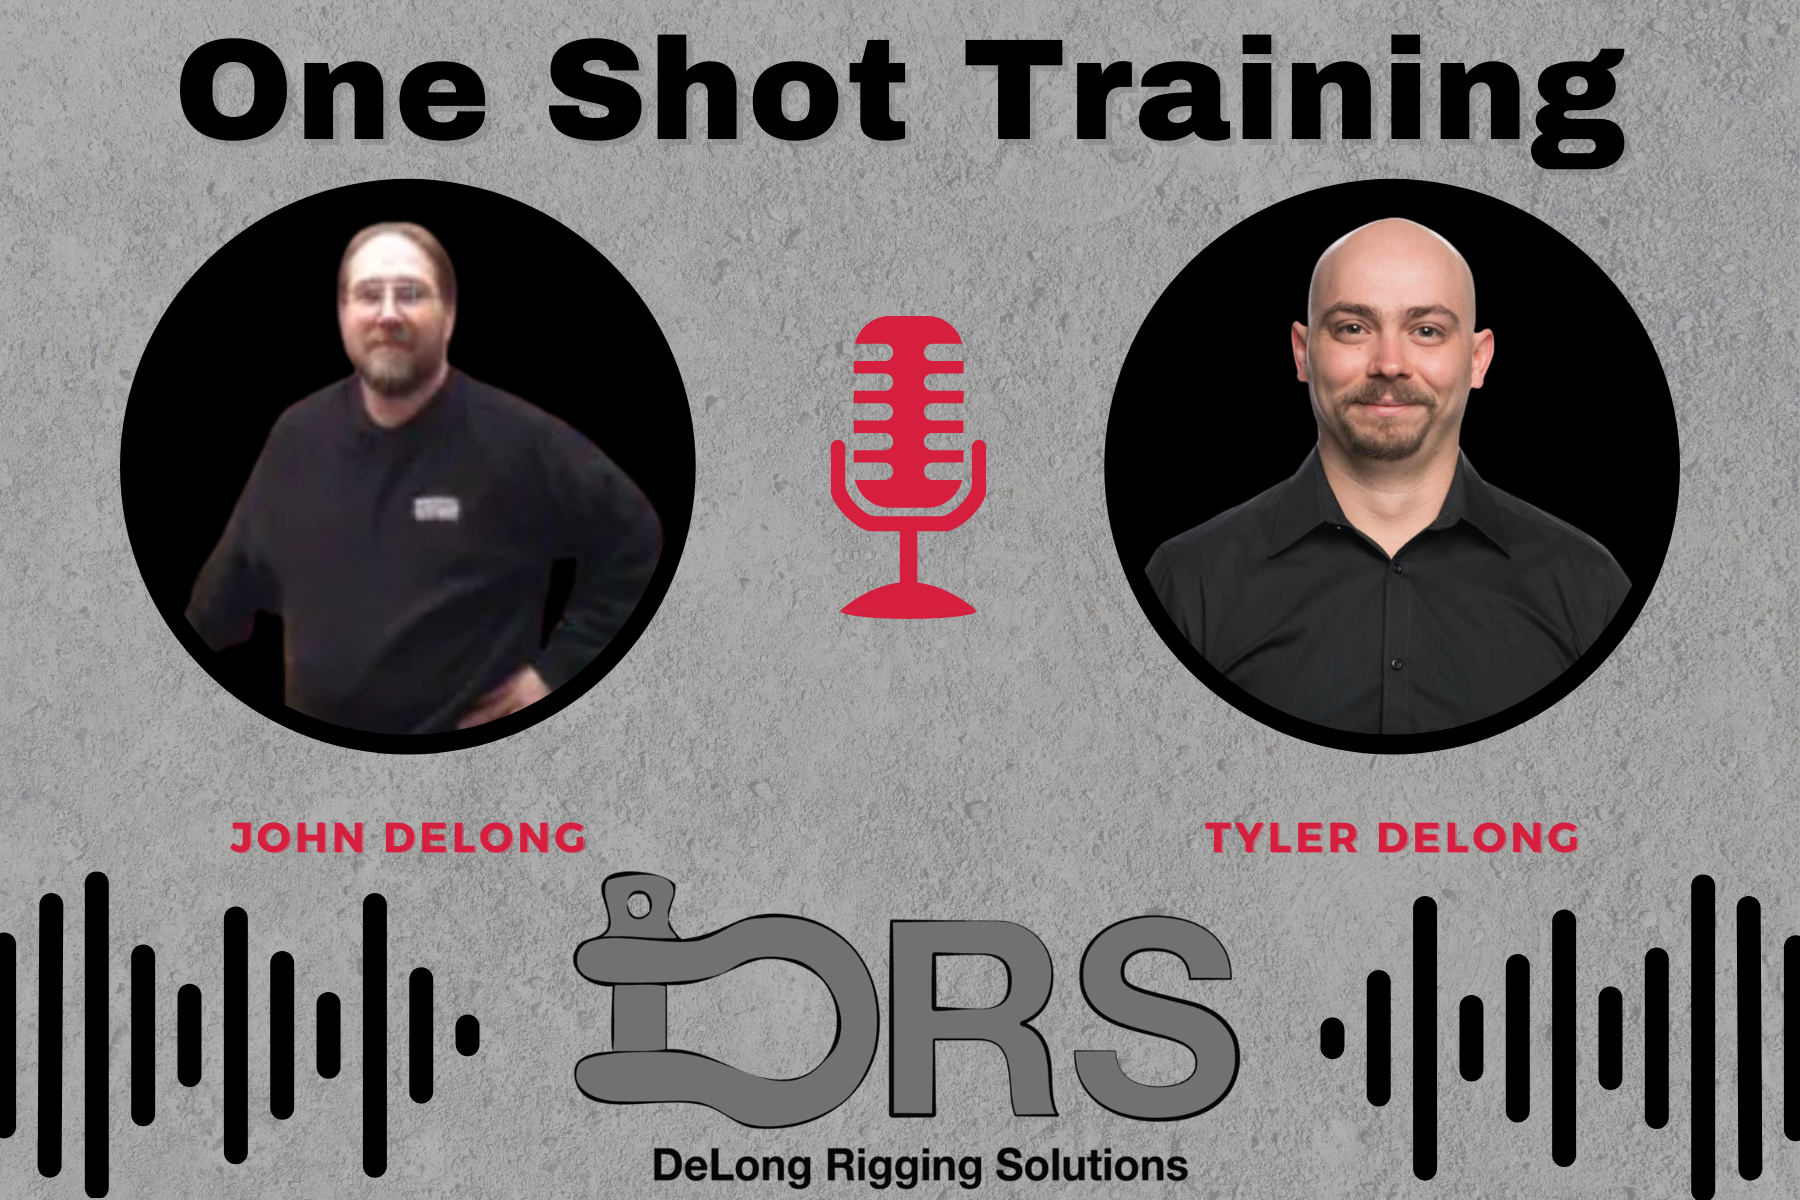 DeLong Rigging Solutions Podcast One Shot Training Graphic